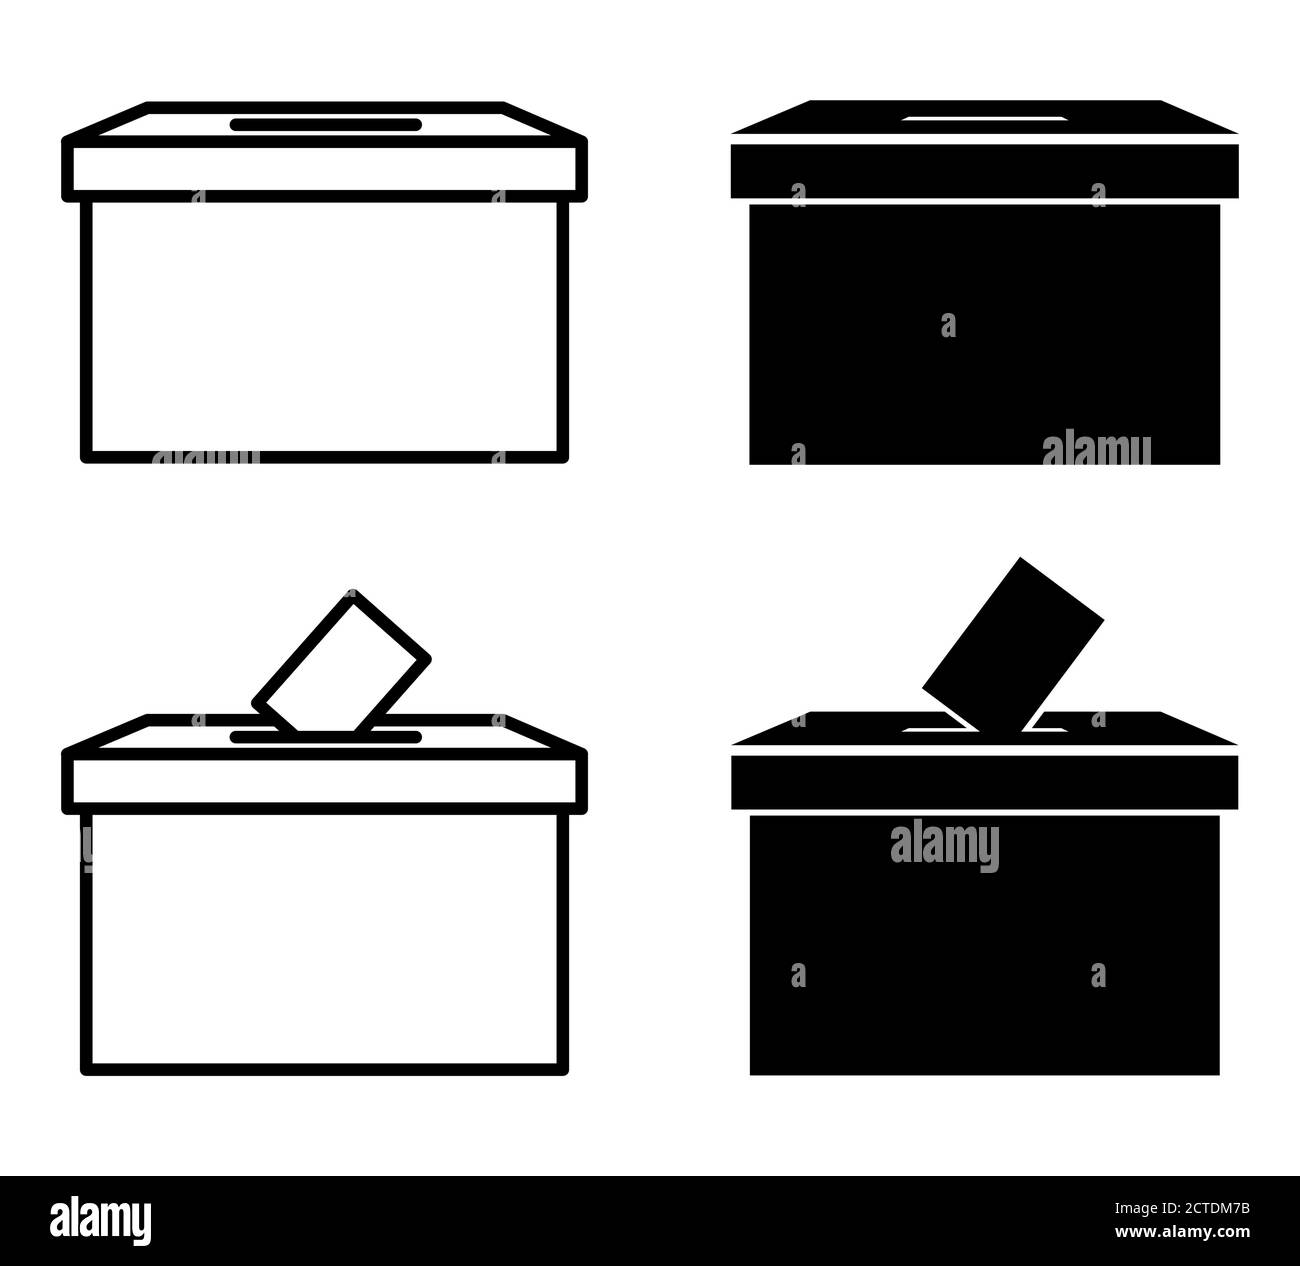 ballot box for election voting set black icons vector illustration isolated on white background Stock Vector